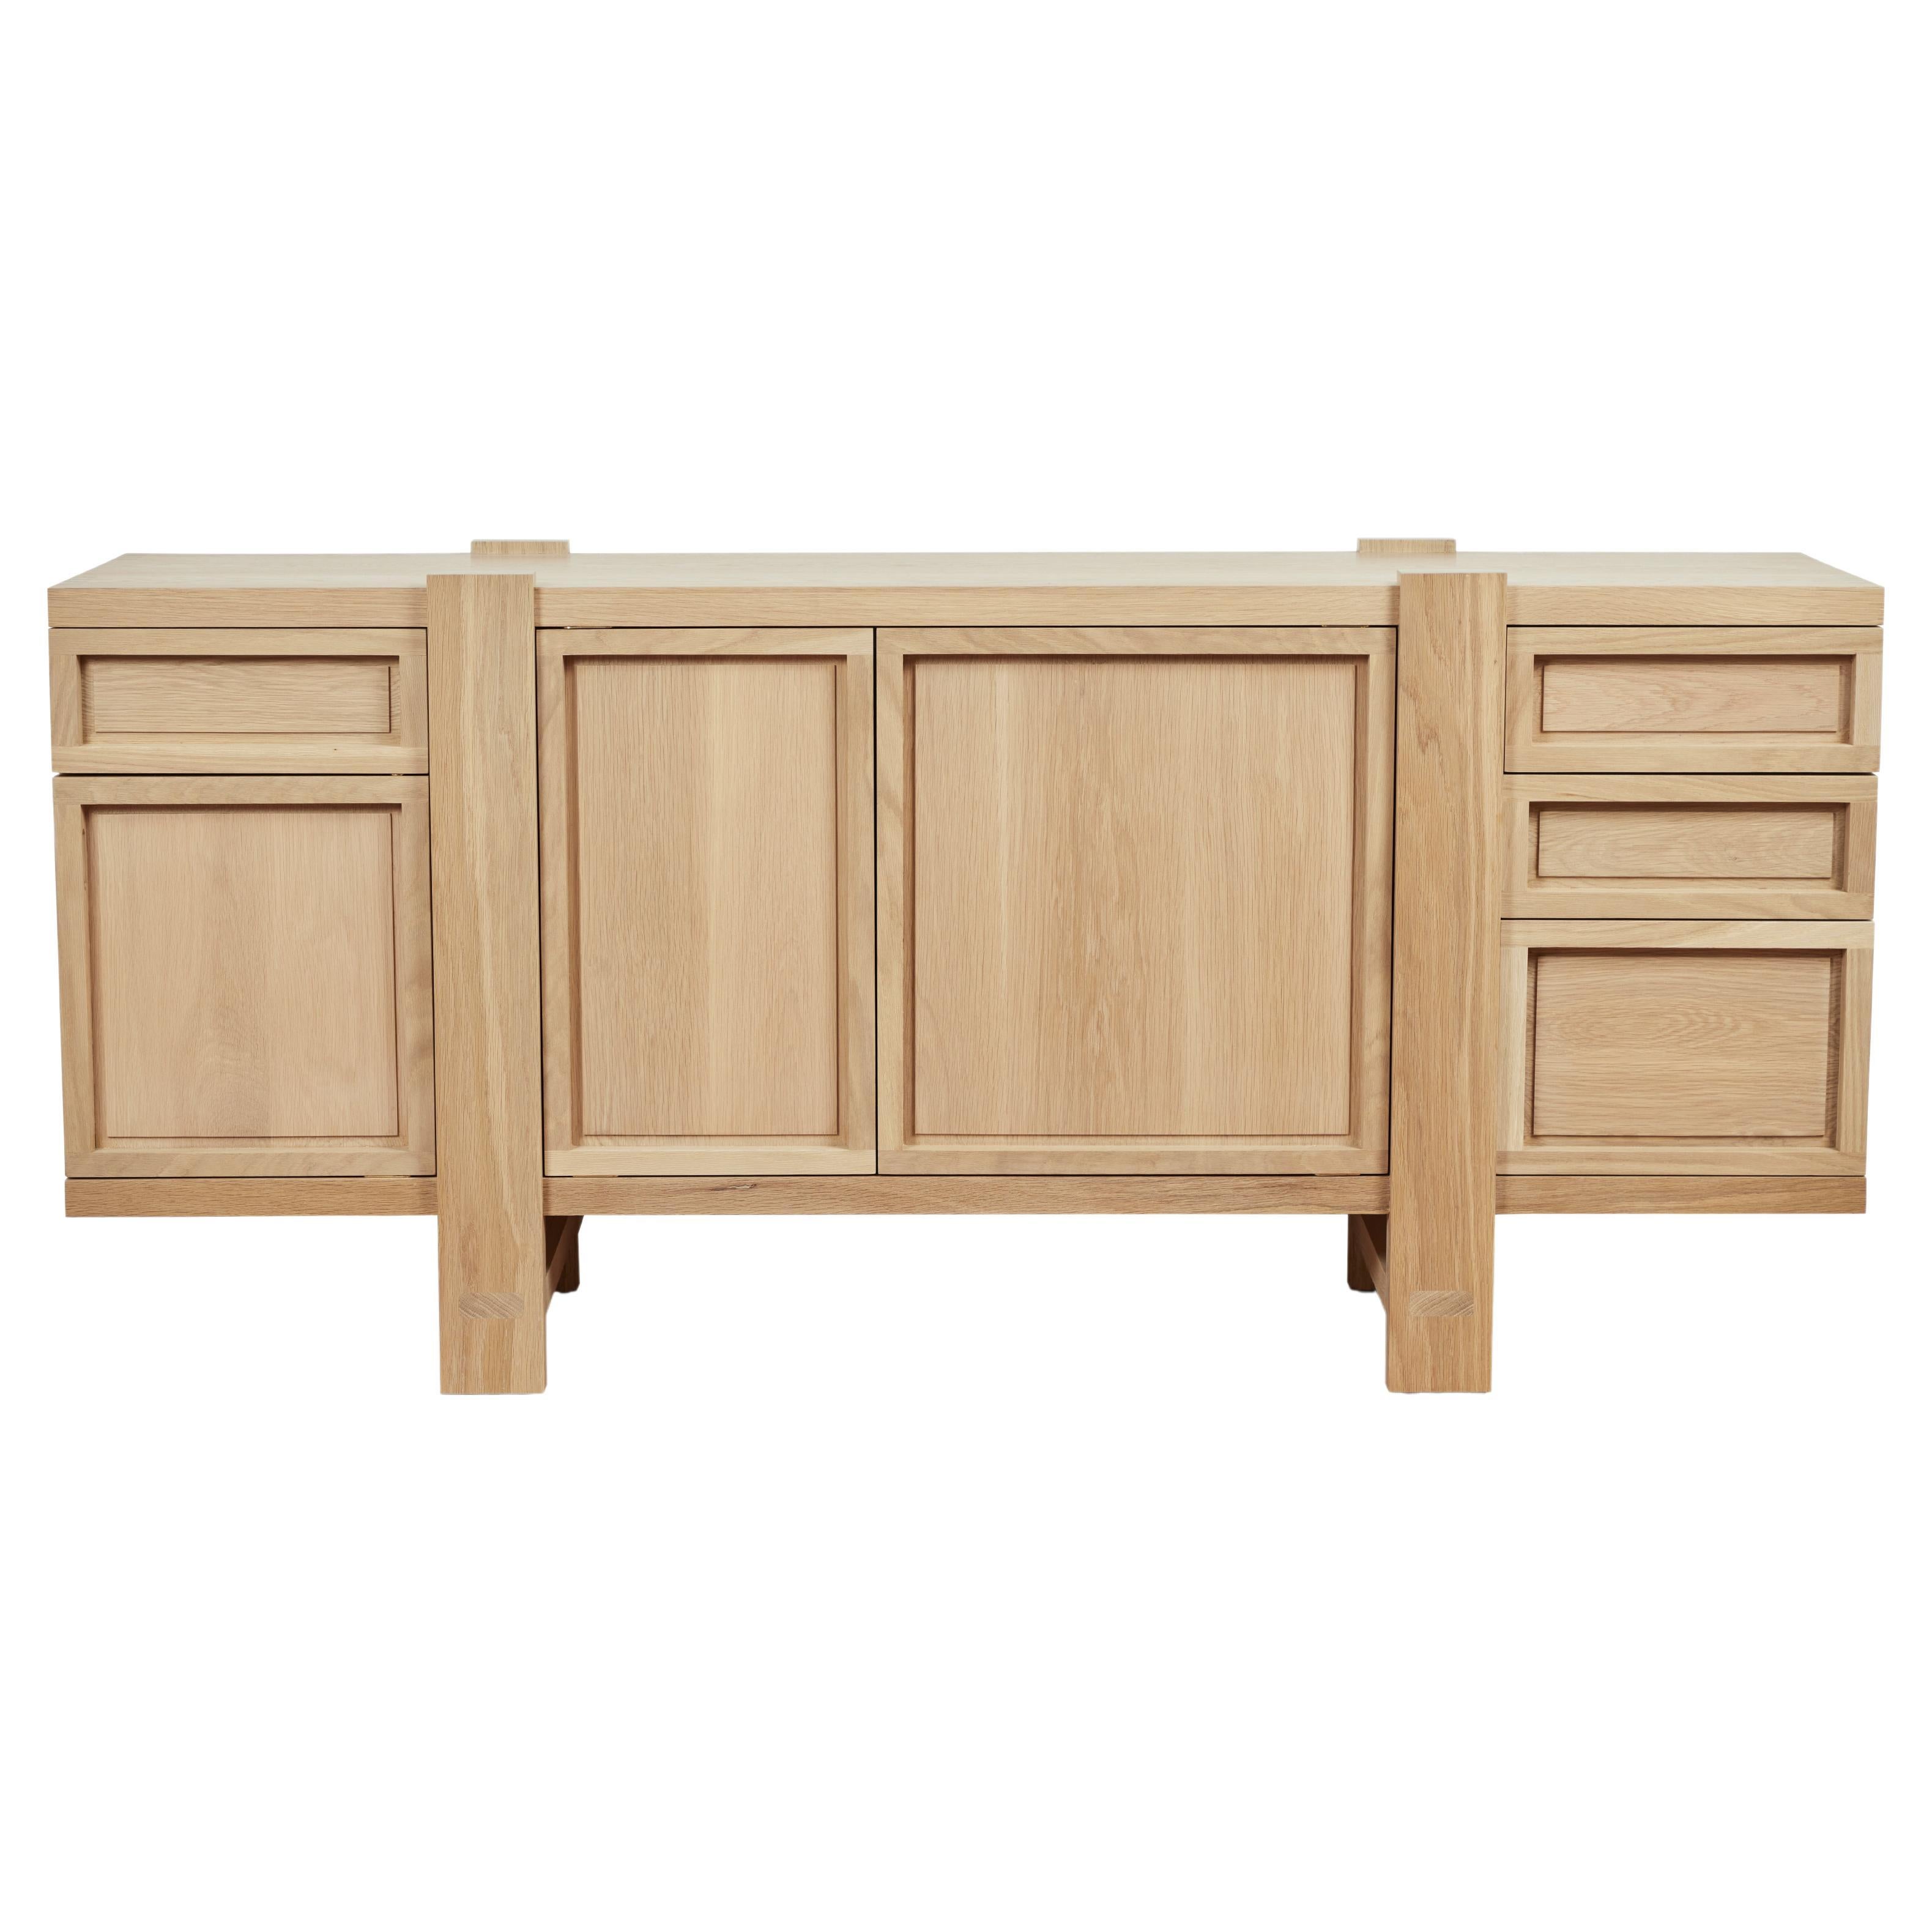 Lake Sideboard, in Natural White Oak, by August Abode